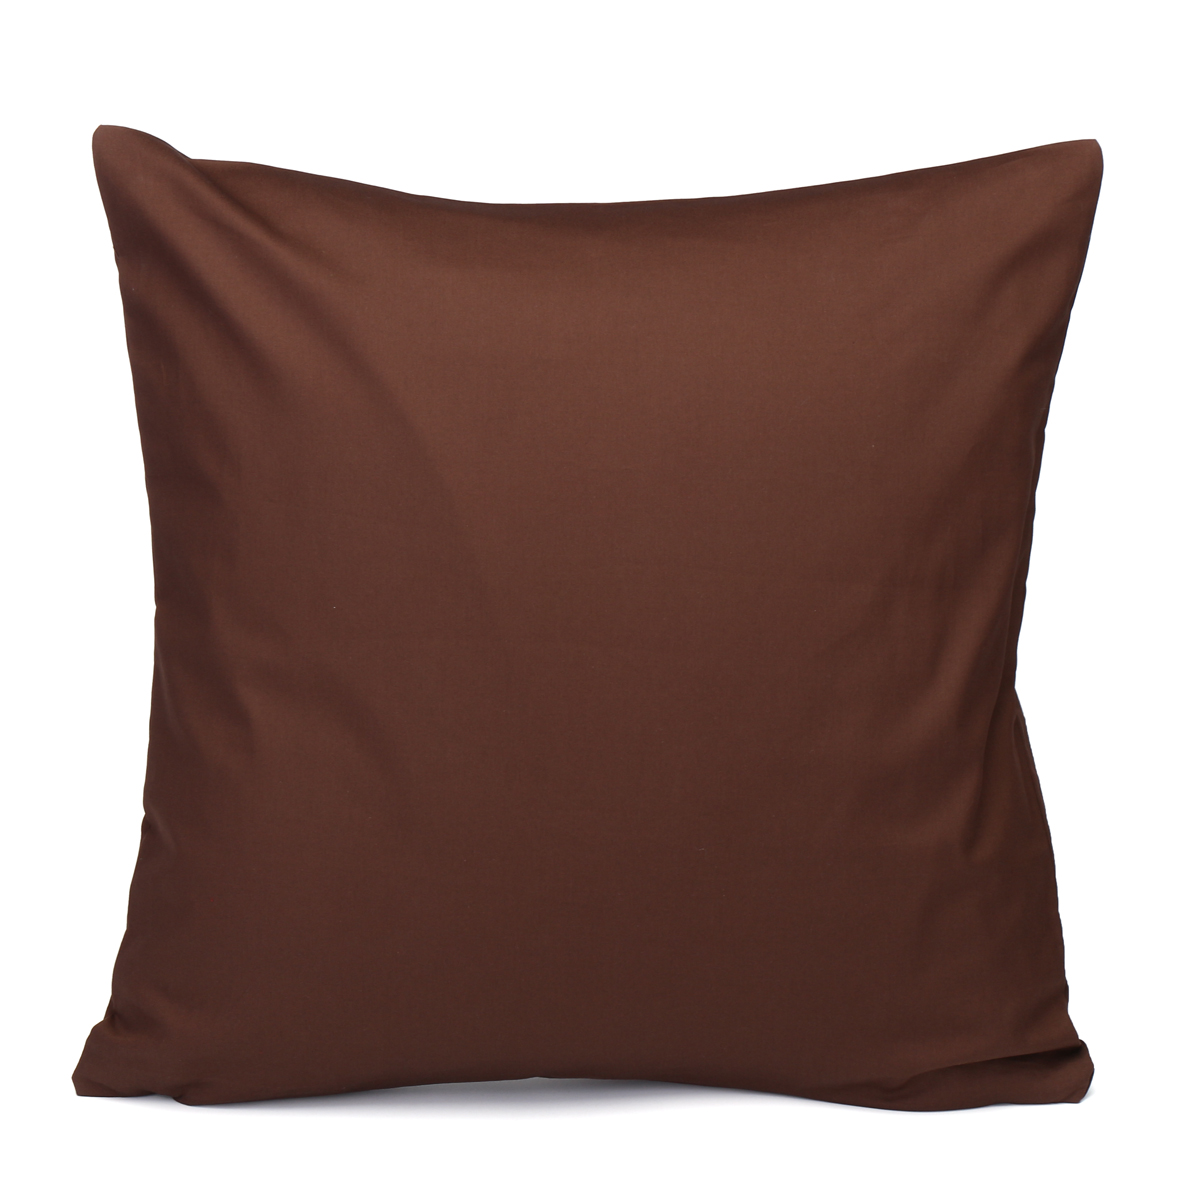 Cotton-Pillow-Case-Solid-Color-Cushion-Cover-Throw-Home-Sofa-Decoration-45X45cm-1579144-5